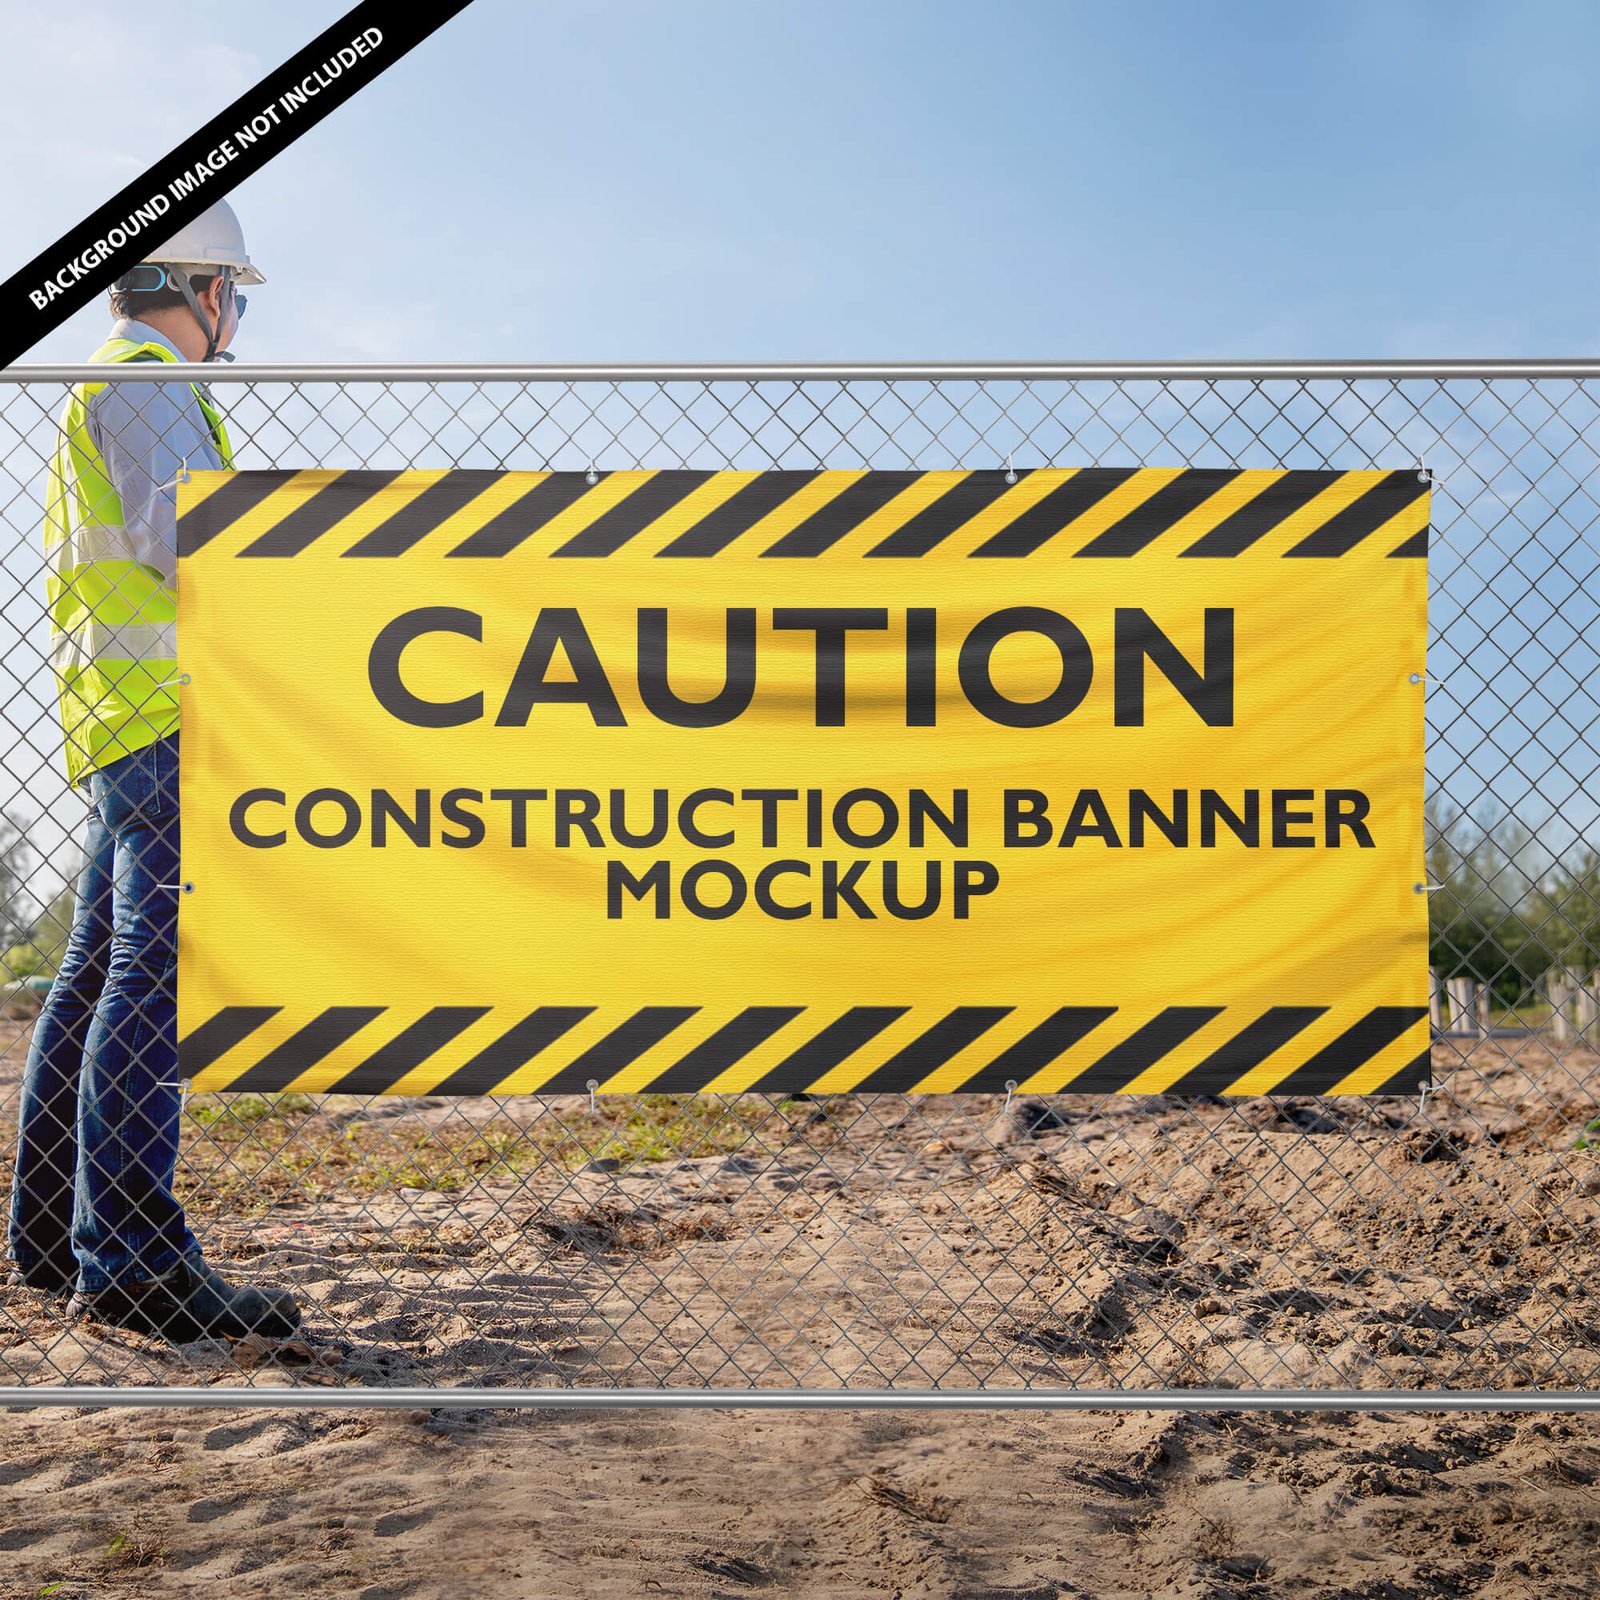 Free Construction Banner Mockup PSD Template